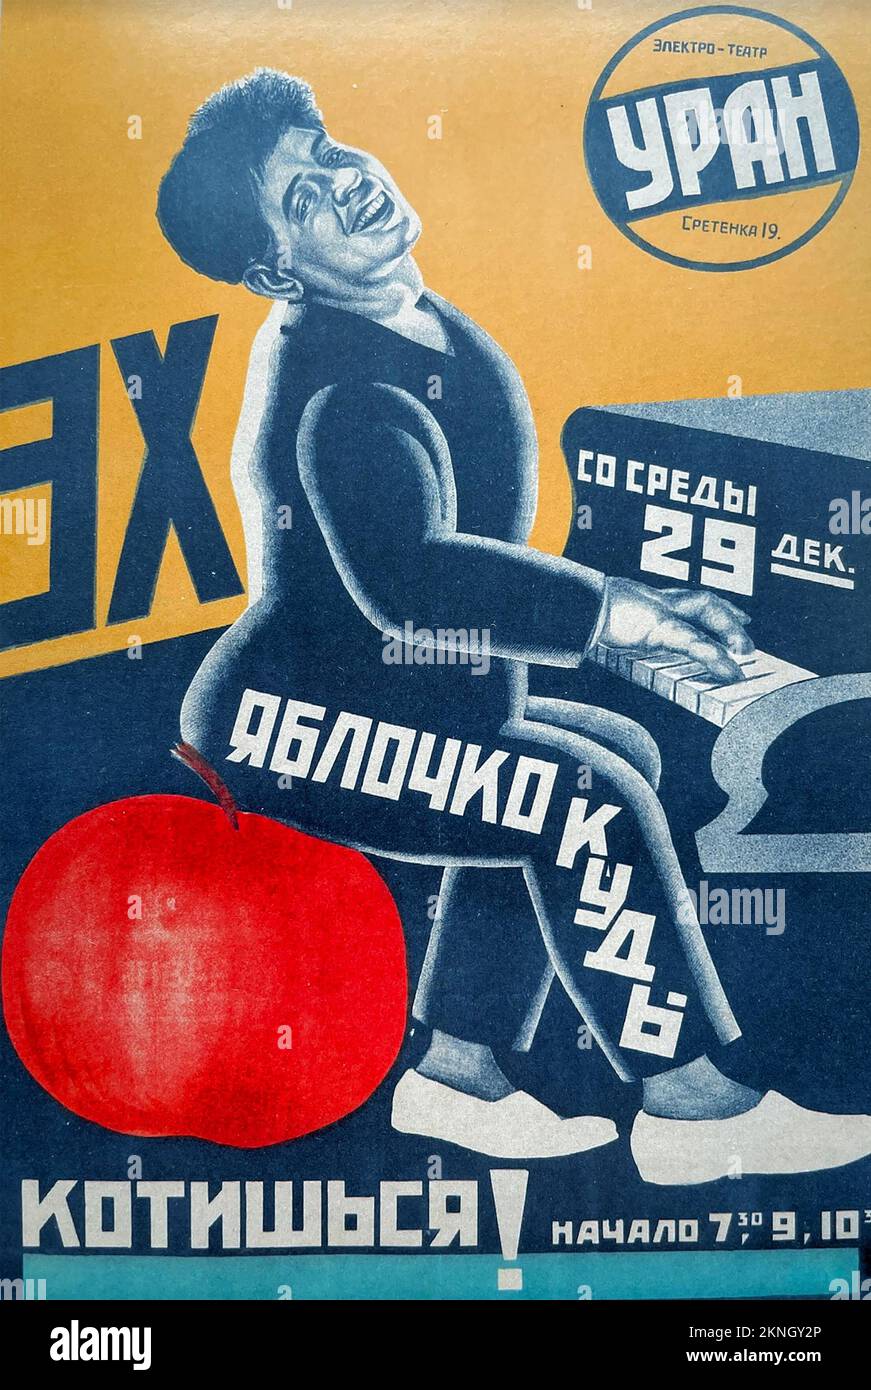 OH LITTLE APPLE !  Soviet poster advertising a stage show at the , on 29 December 1926 at the Uran Theater, Moscow Stock Photo